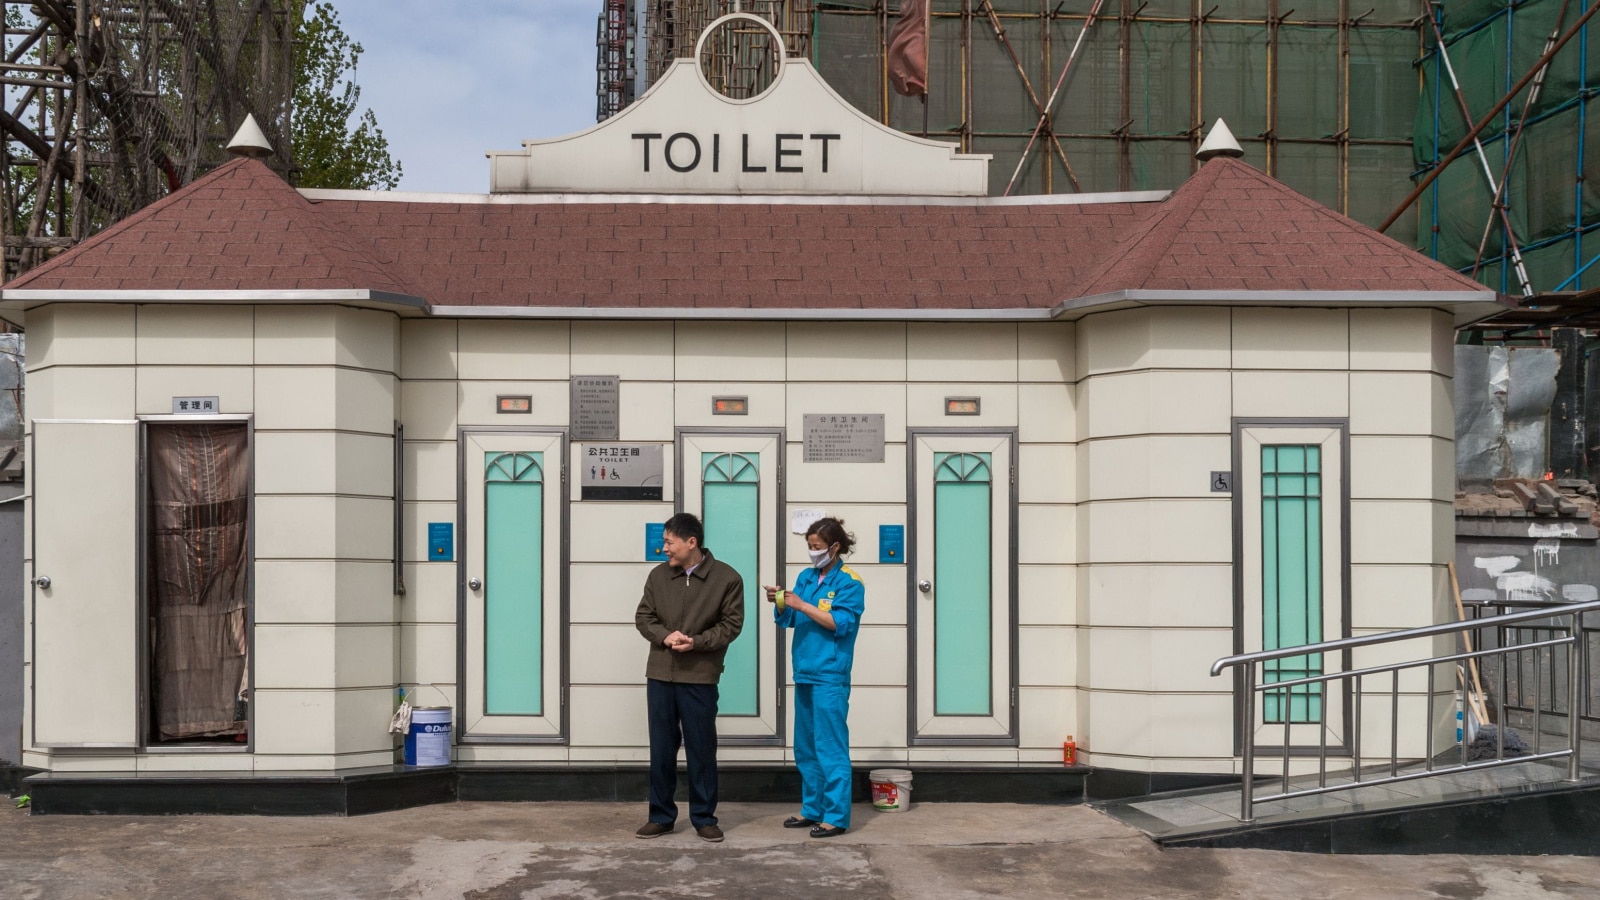 Beijing, China - April 26, 2010: Neat beige with brown roof modern public toilet cabin along street. Maintenance worker in blue uniform on site. Man in photo, too.